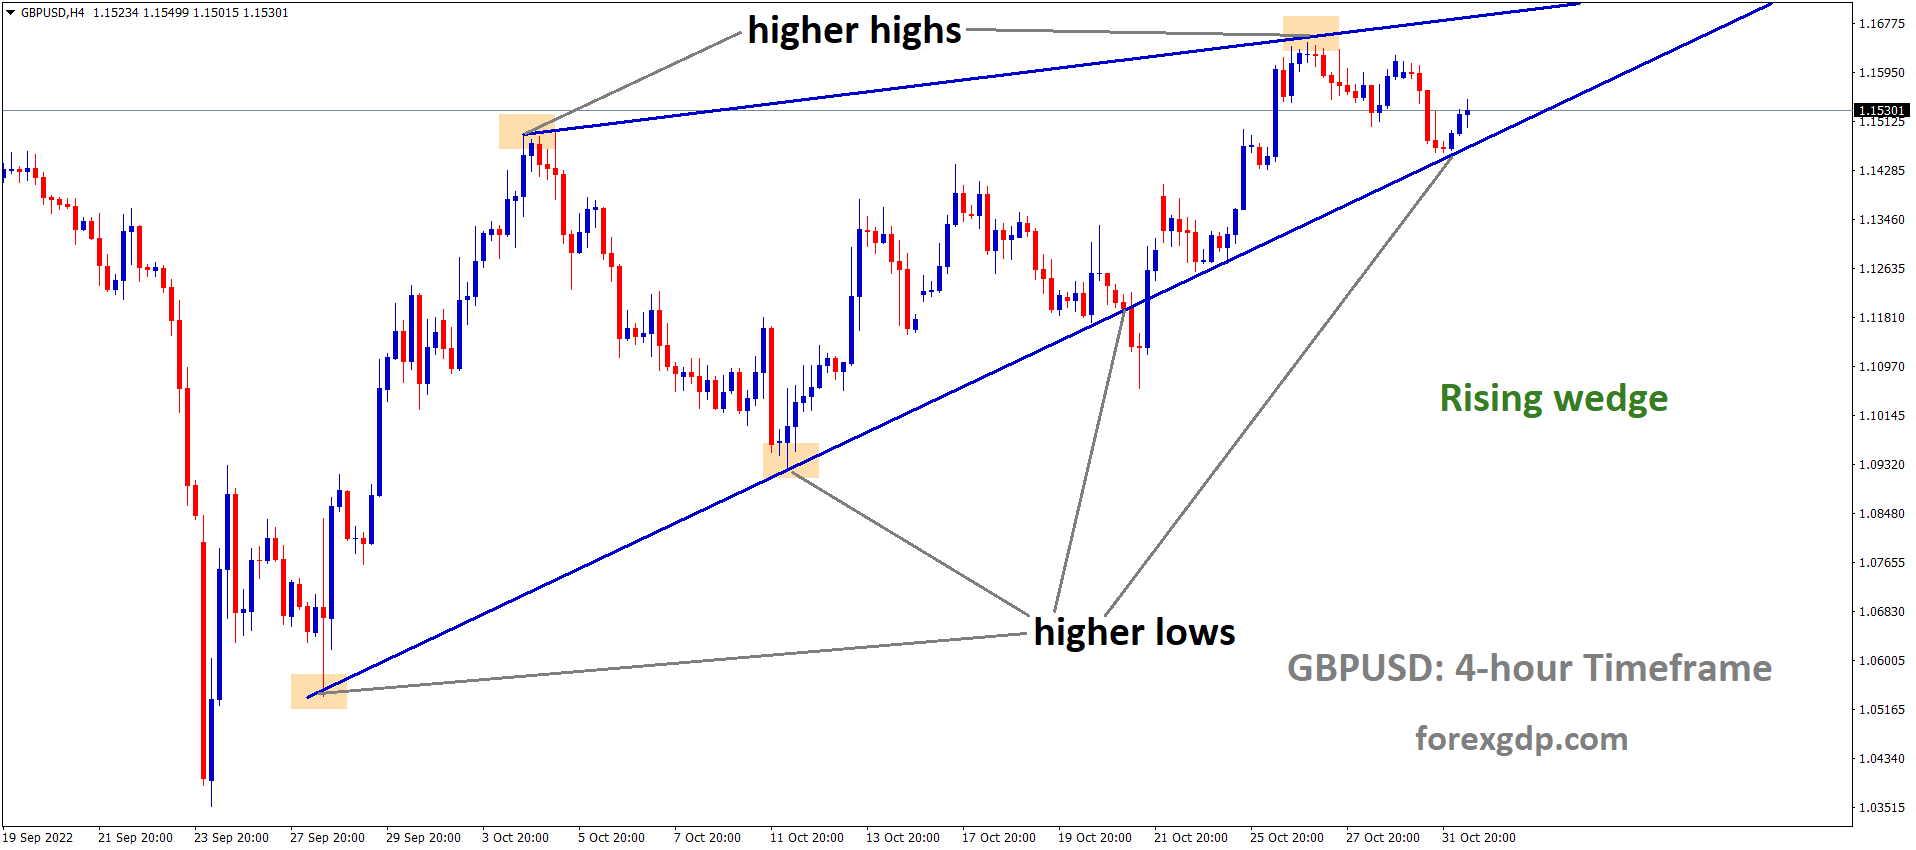 GBPUSD is moving in the Rising wedge pattern and the market has rebounded from the higher low area of the pattern